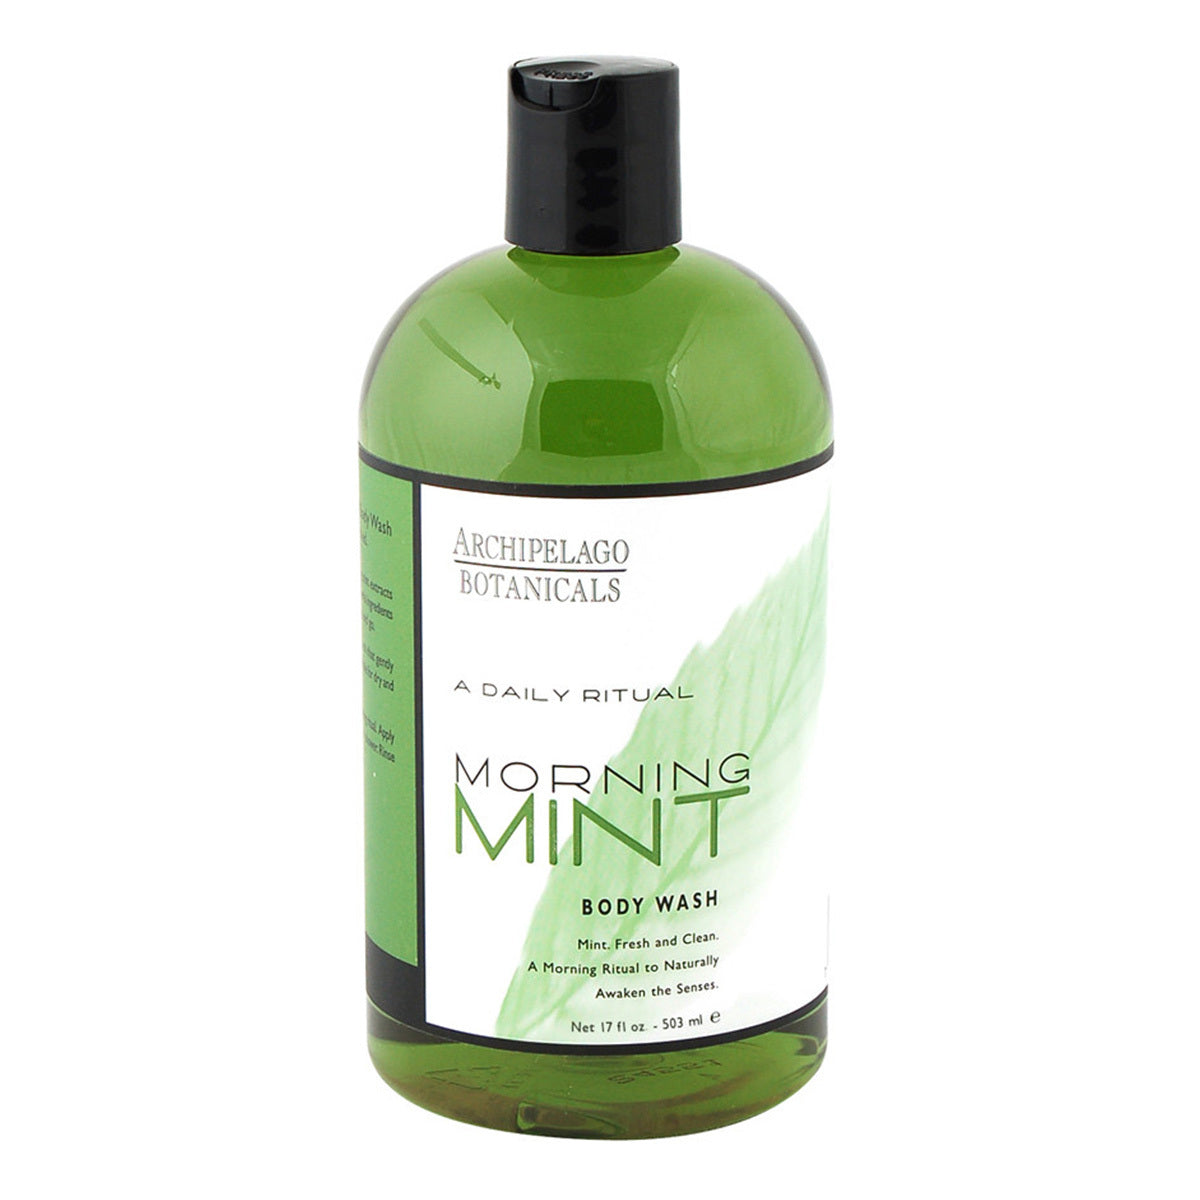 Primary image of Morning Mint Body Wash